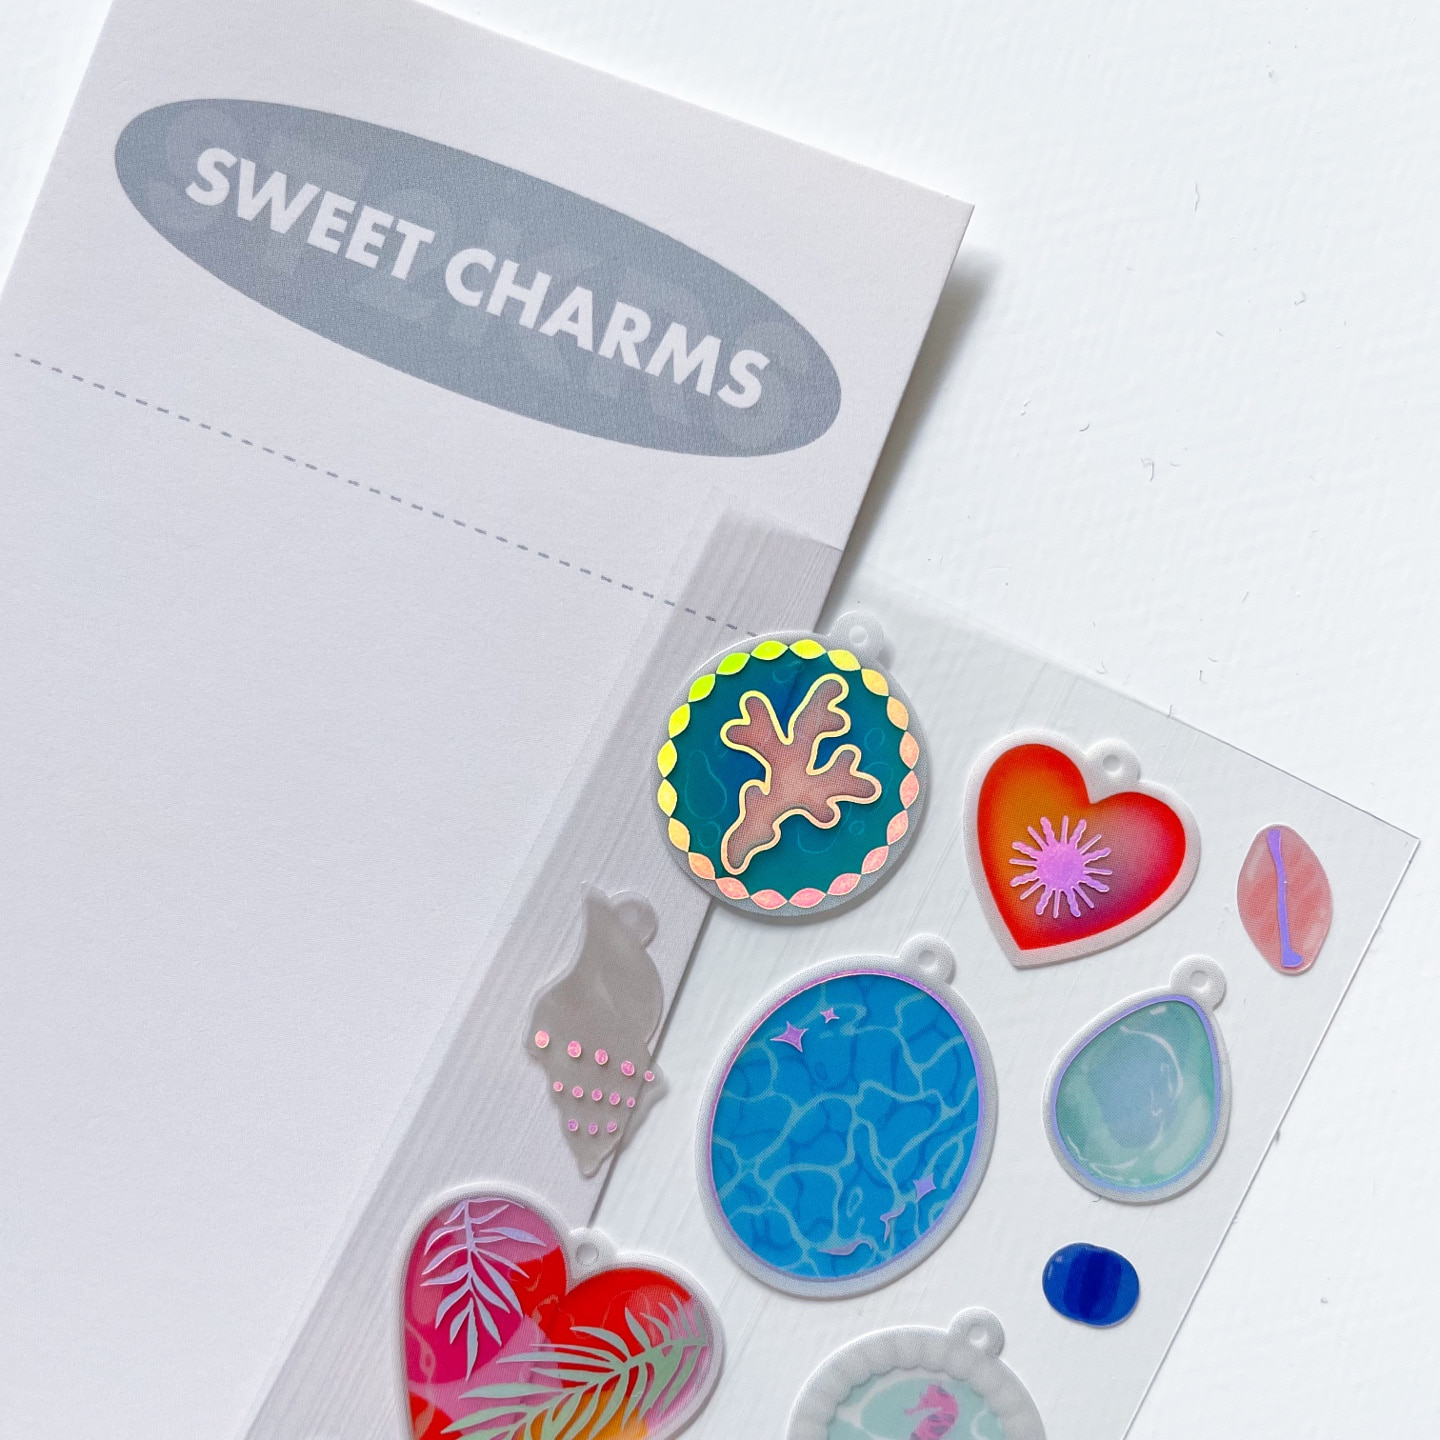 [ST2KERS]SWEET CHARMS 씰스티커